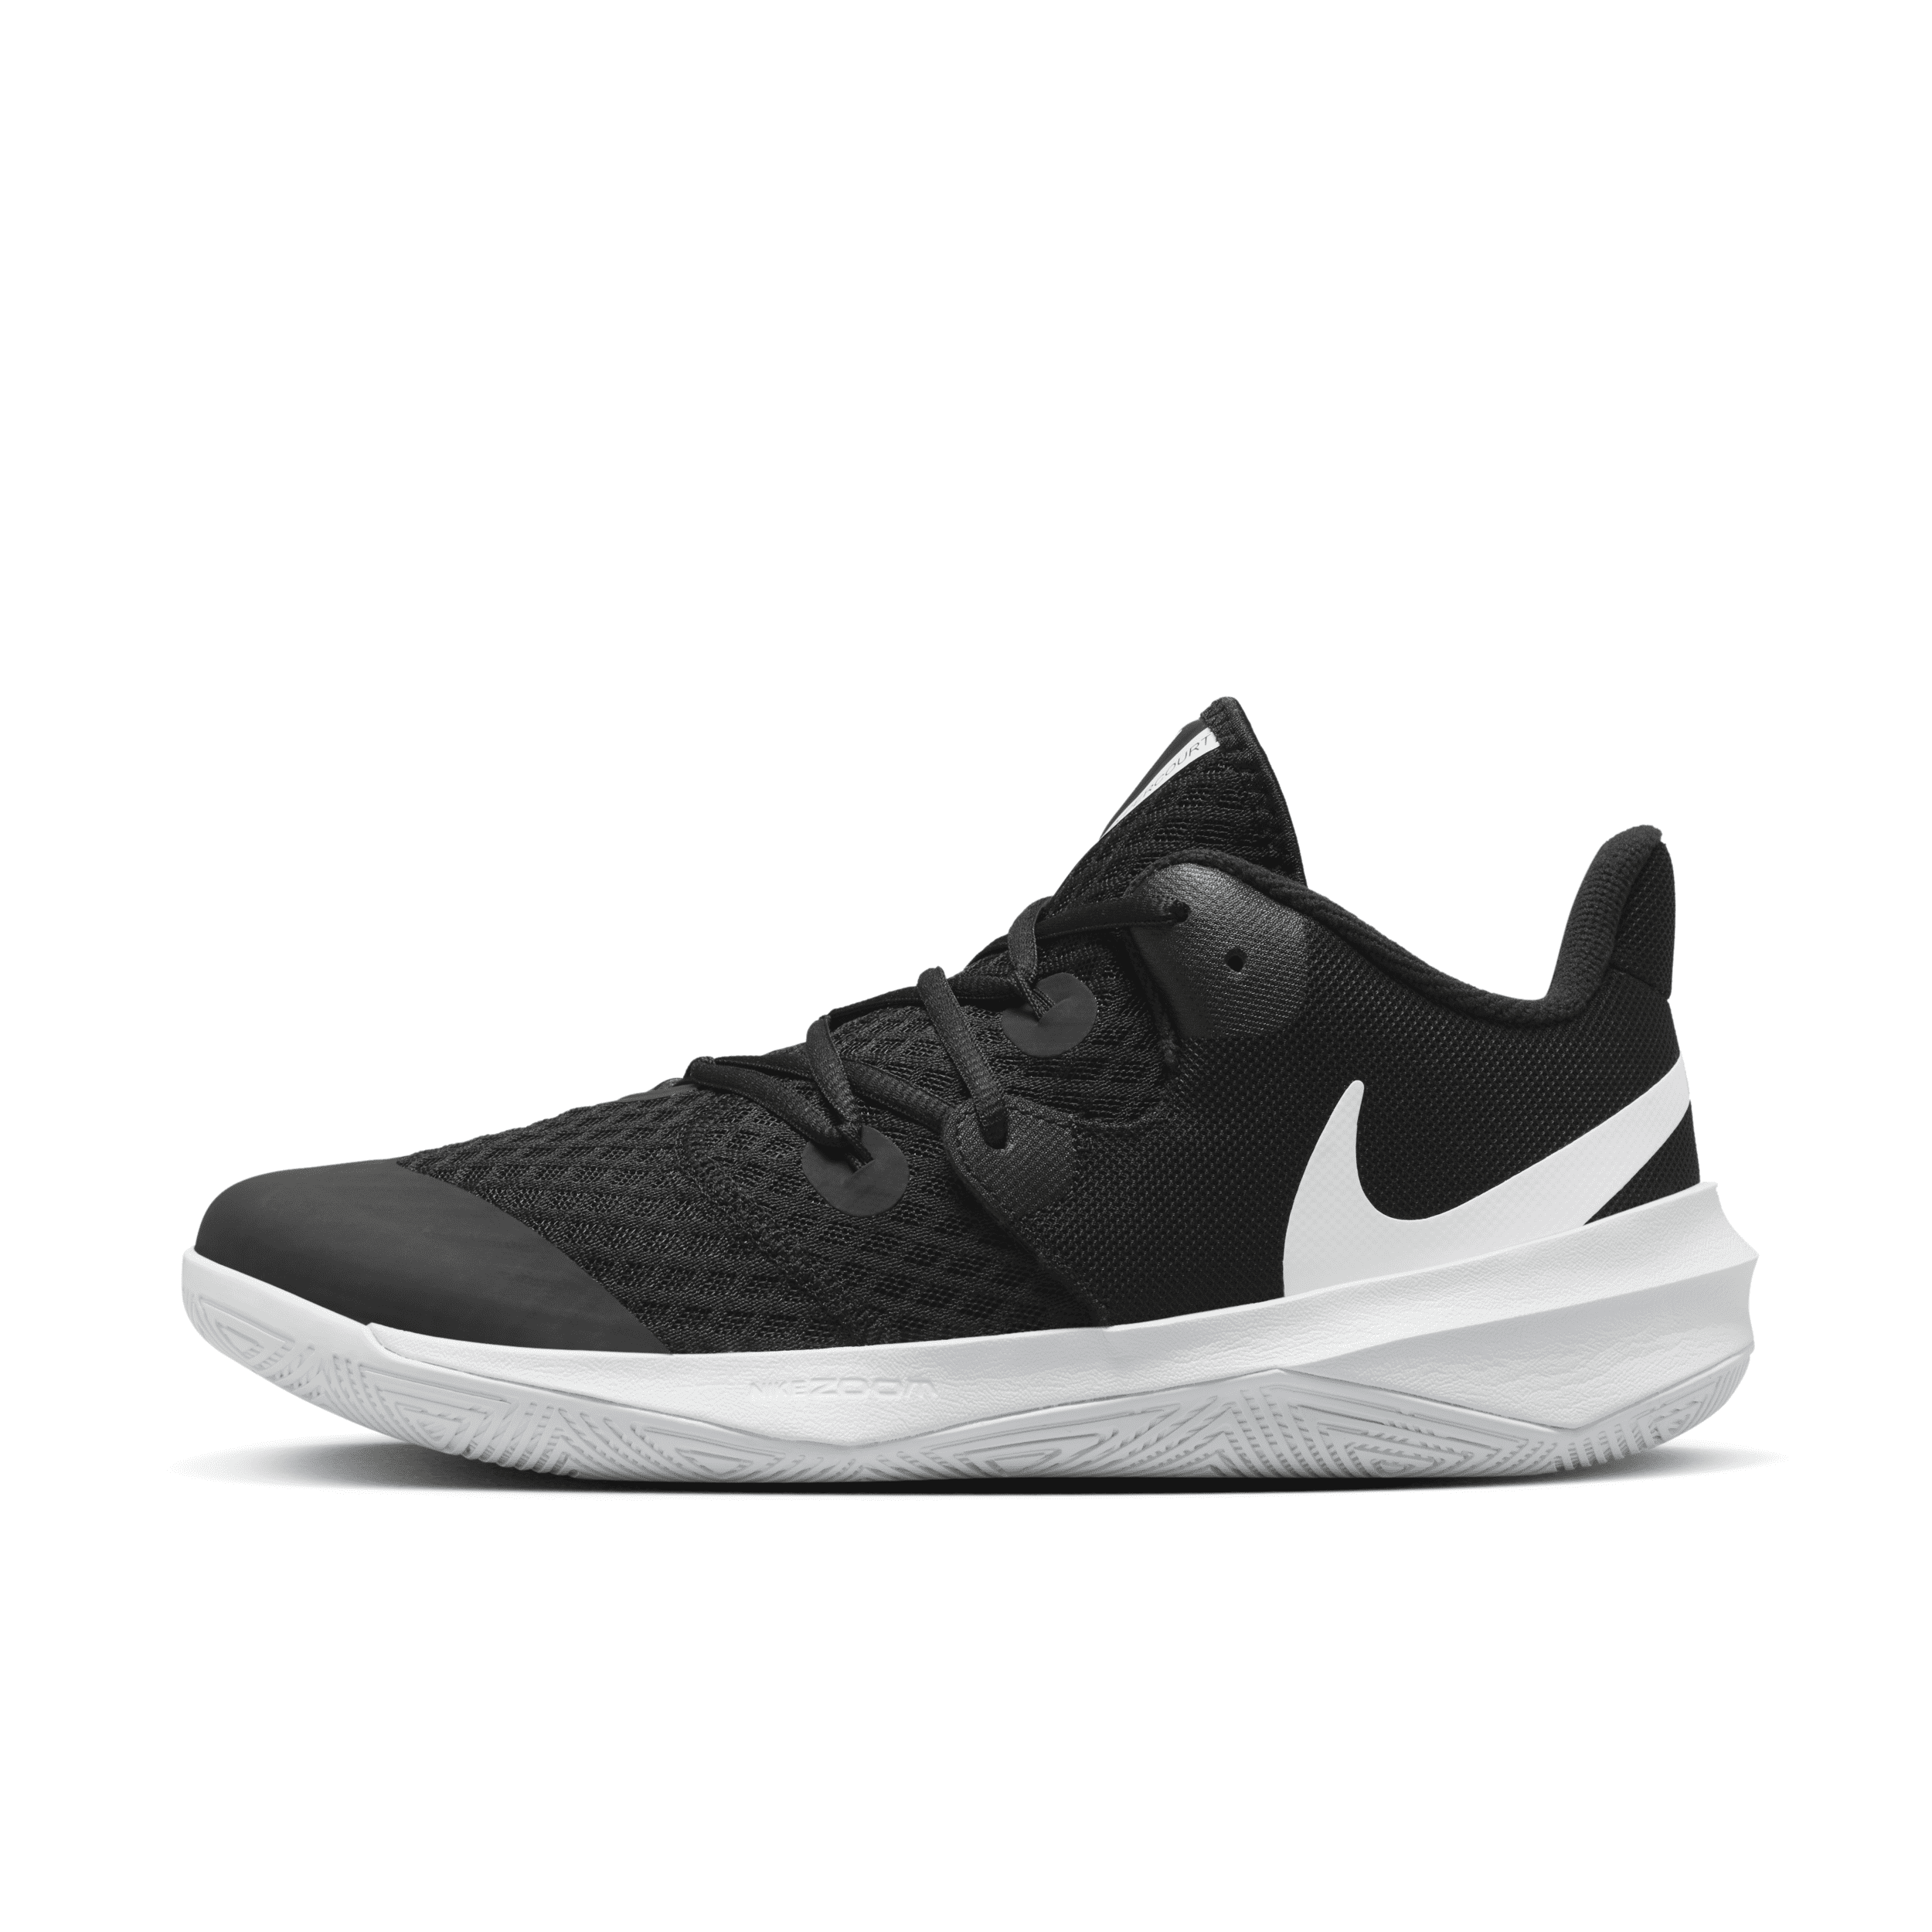 Nike Unisex Hyperspeed Court Volleyball Shoes In Black